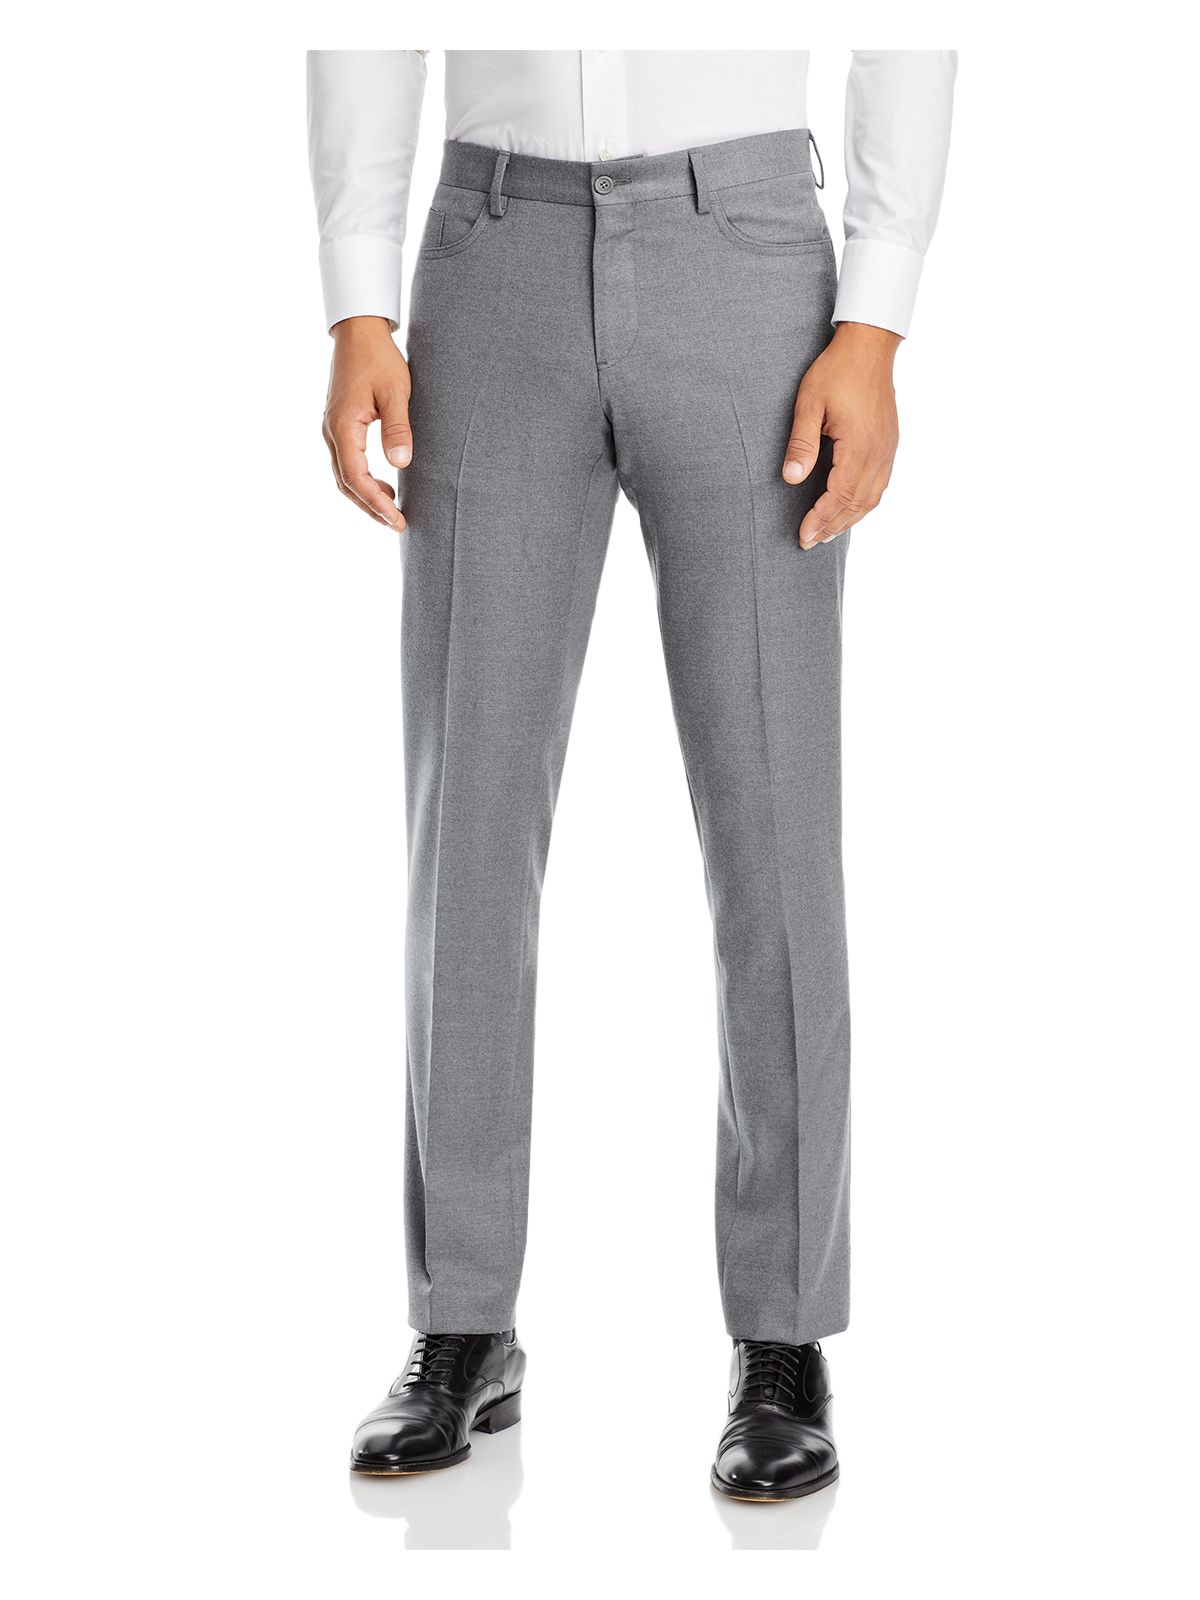 THE MENS STORE Mens Milano Gray Flat Front, Regular Fit Stretch Pants 36 Waist